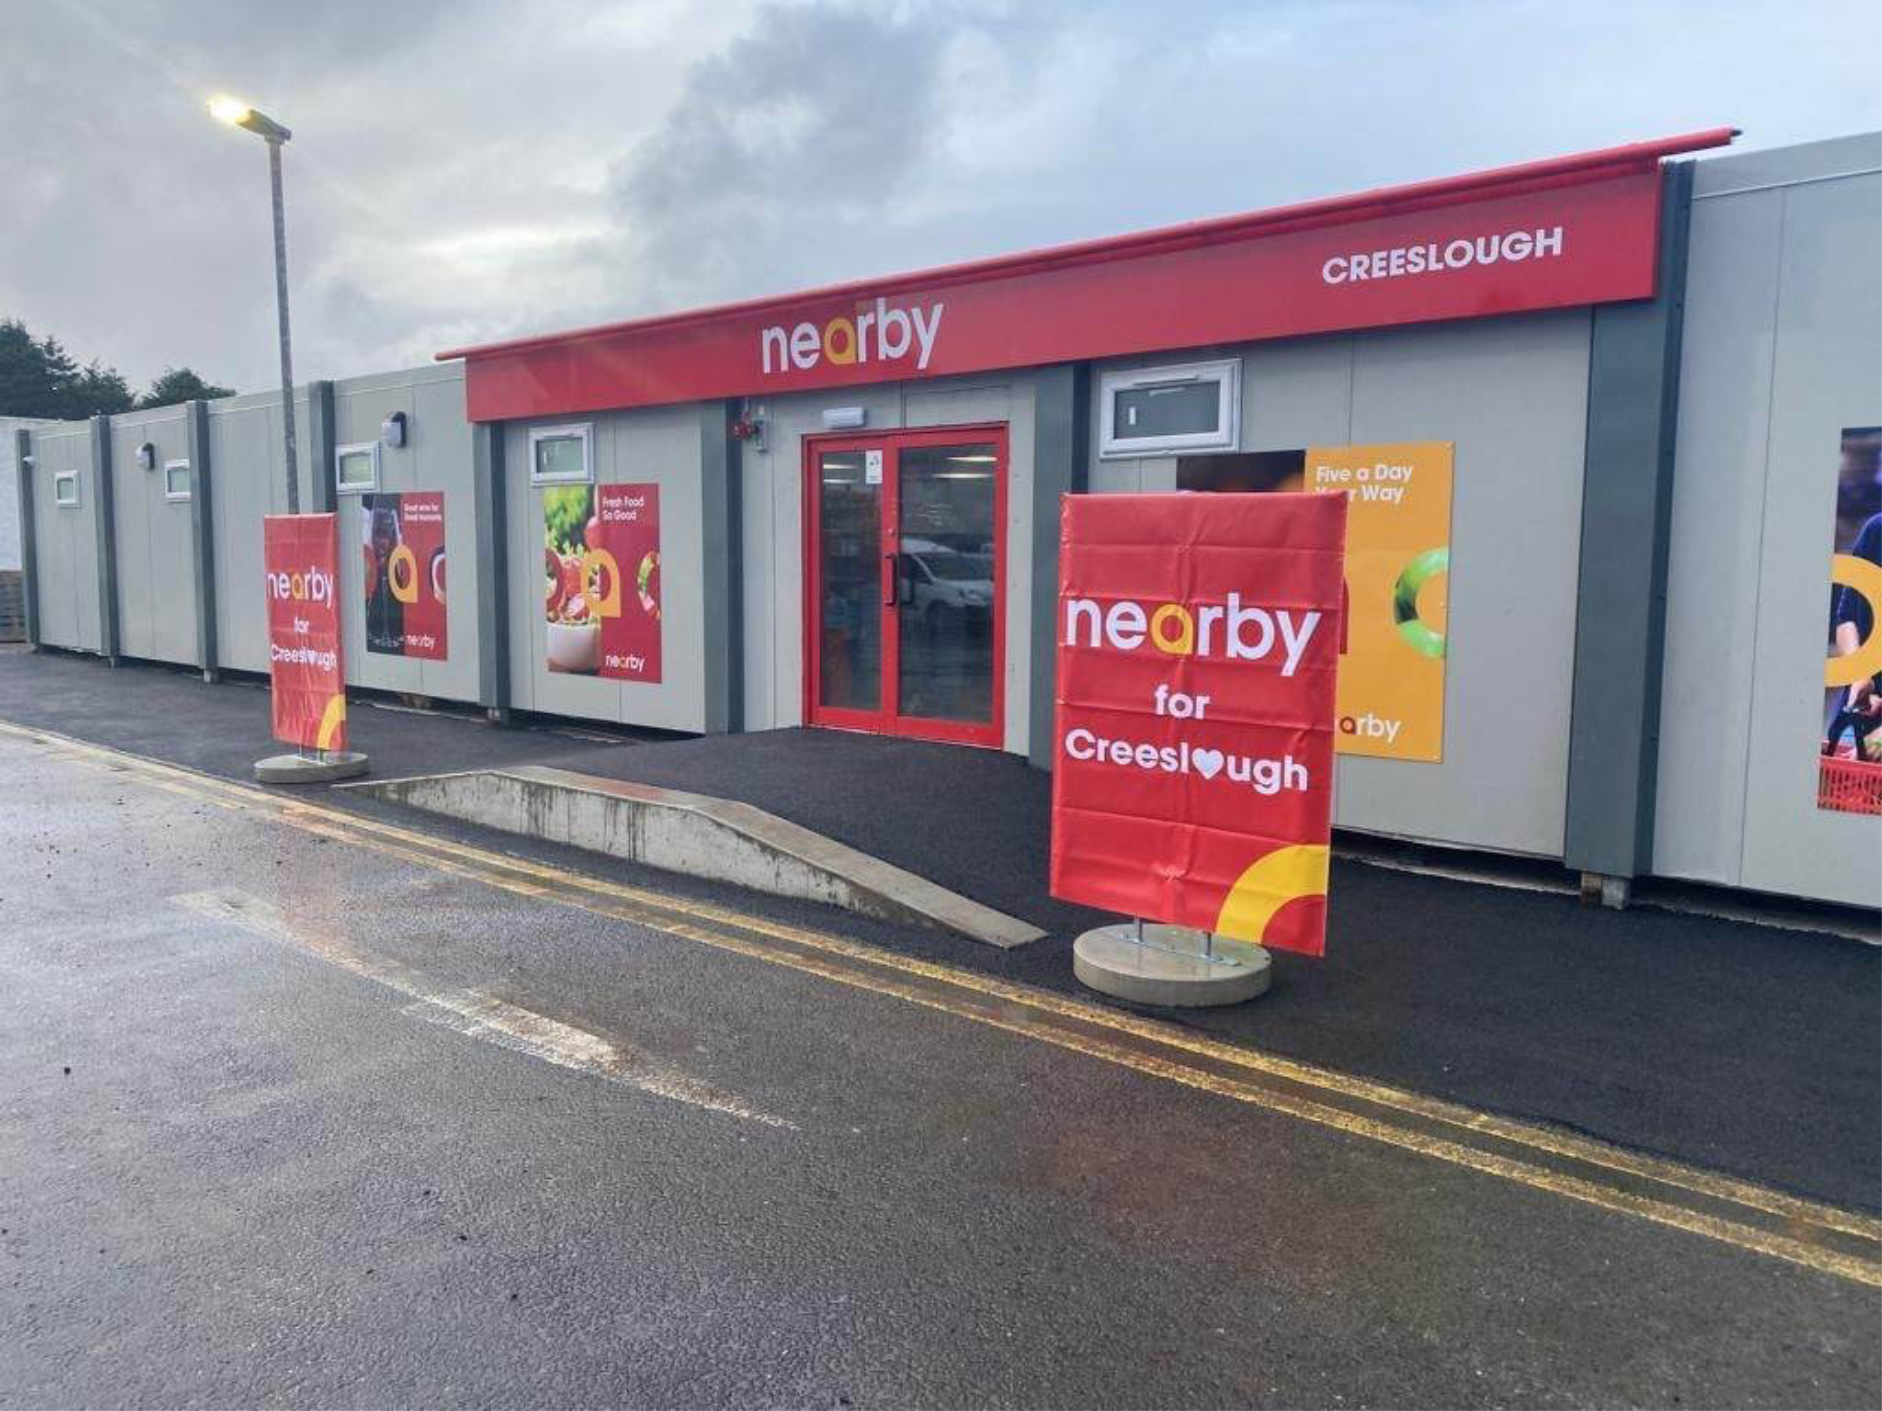 Nearby opens “much-needed store” for people of Creeslough